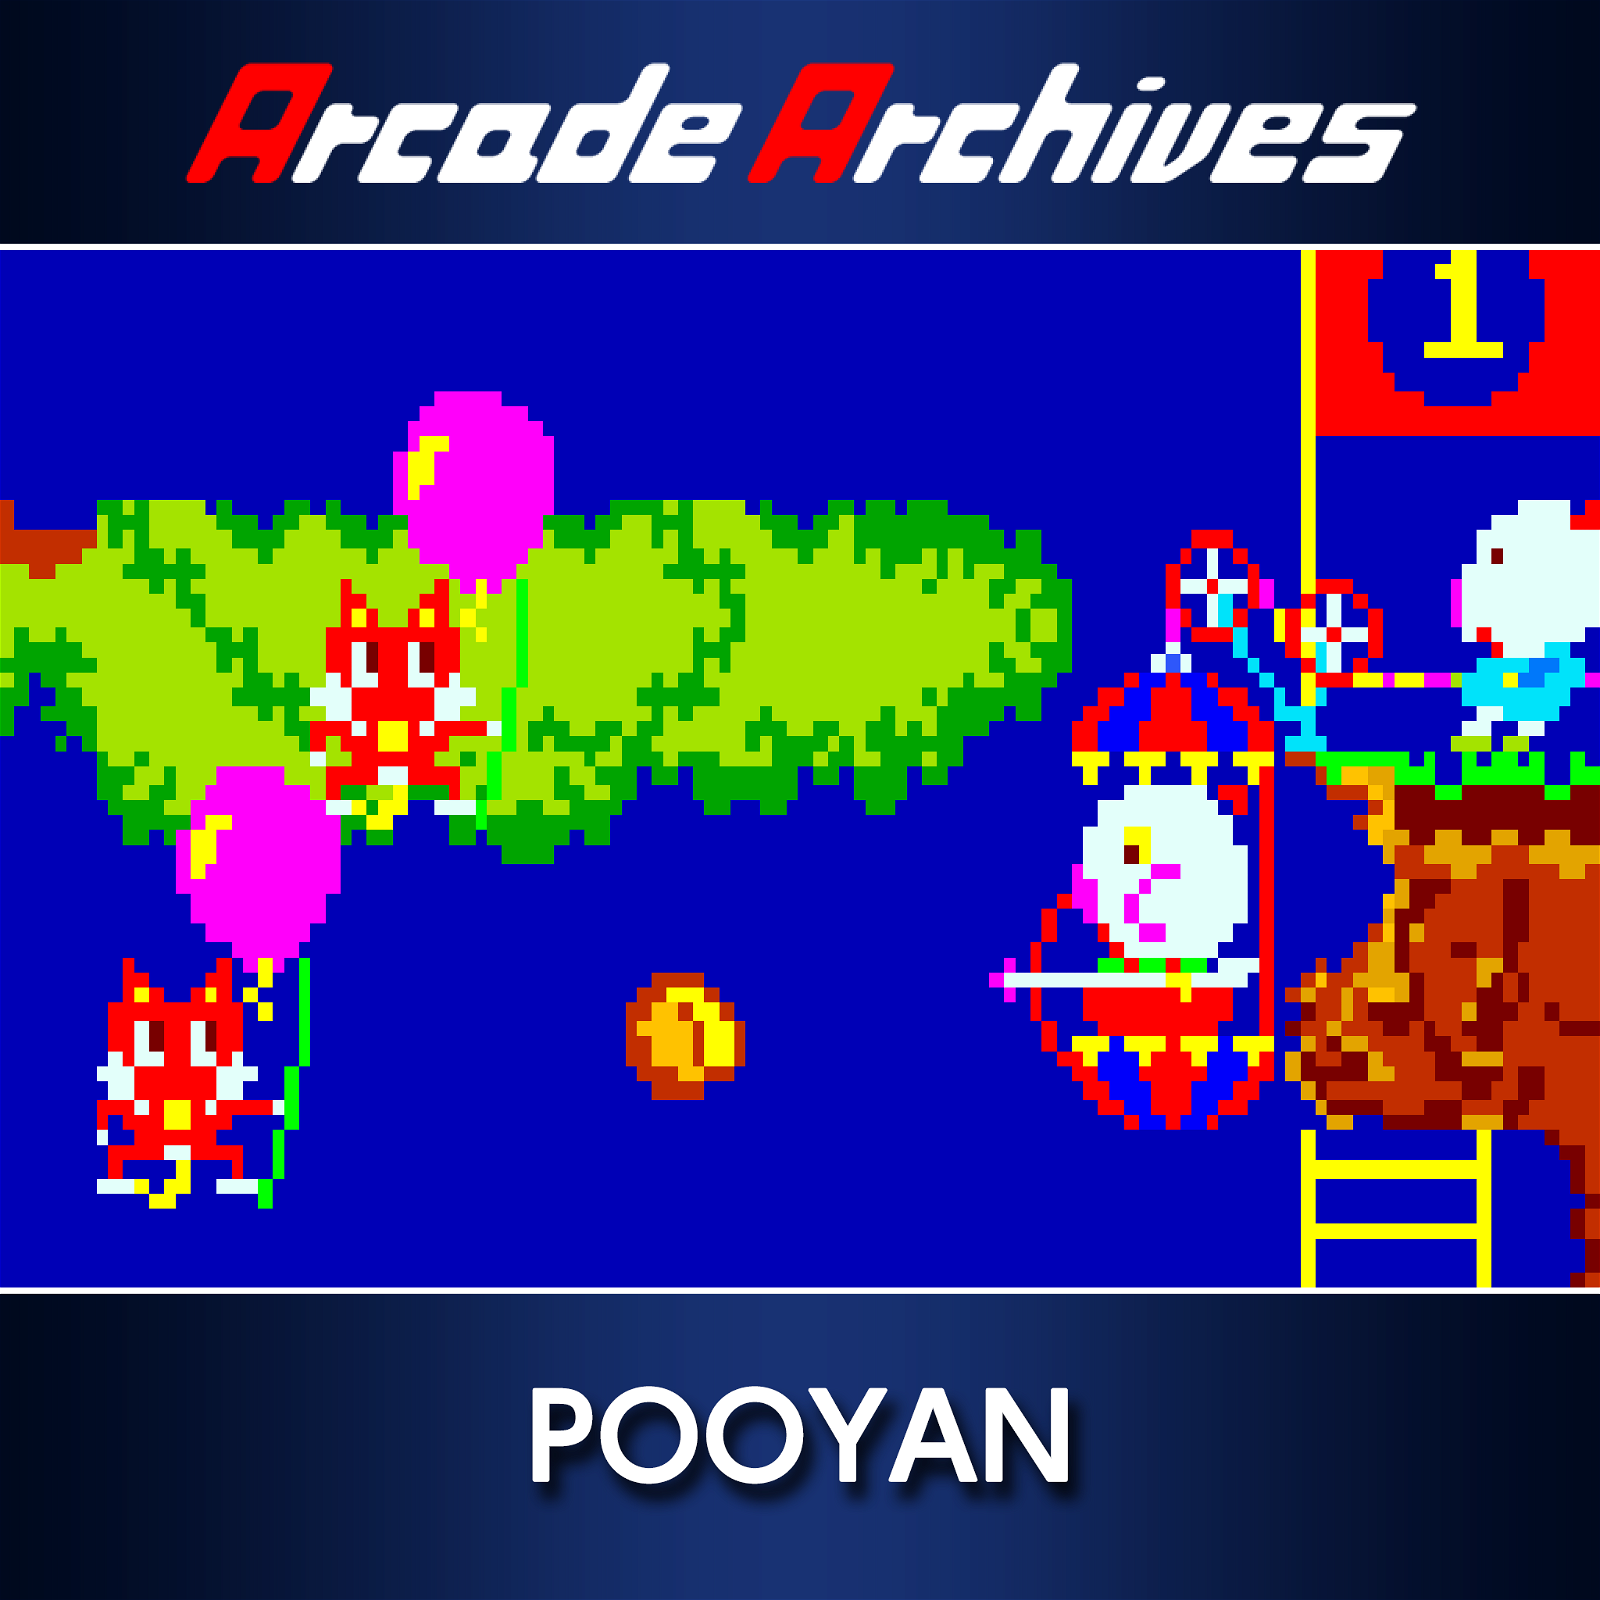 Image of Arcade Archives POOYAN